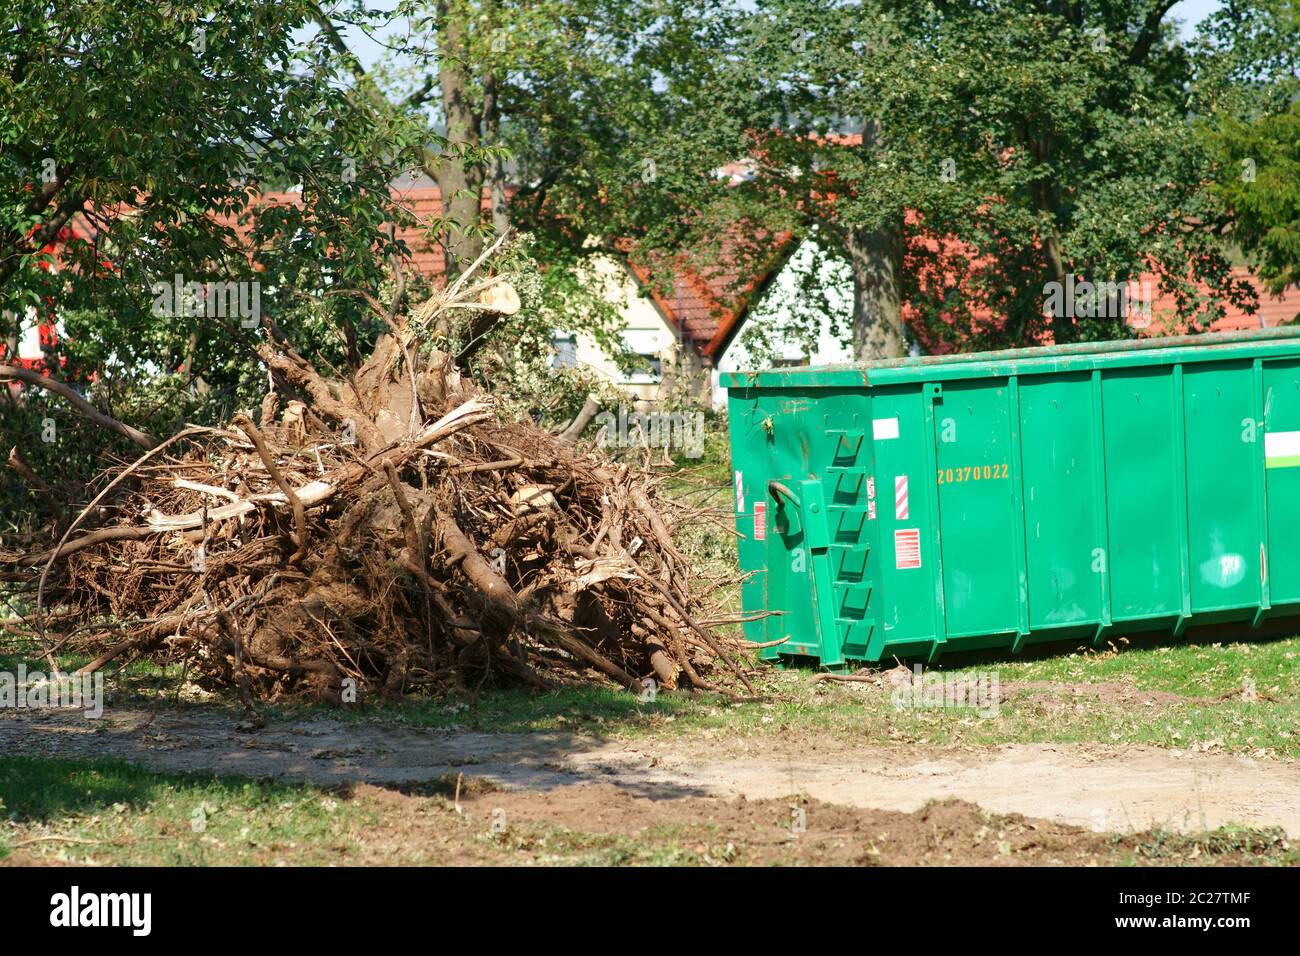 A pile of sawed branches, twigs and trees after a storm. Stock Photo